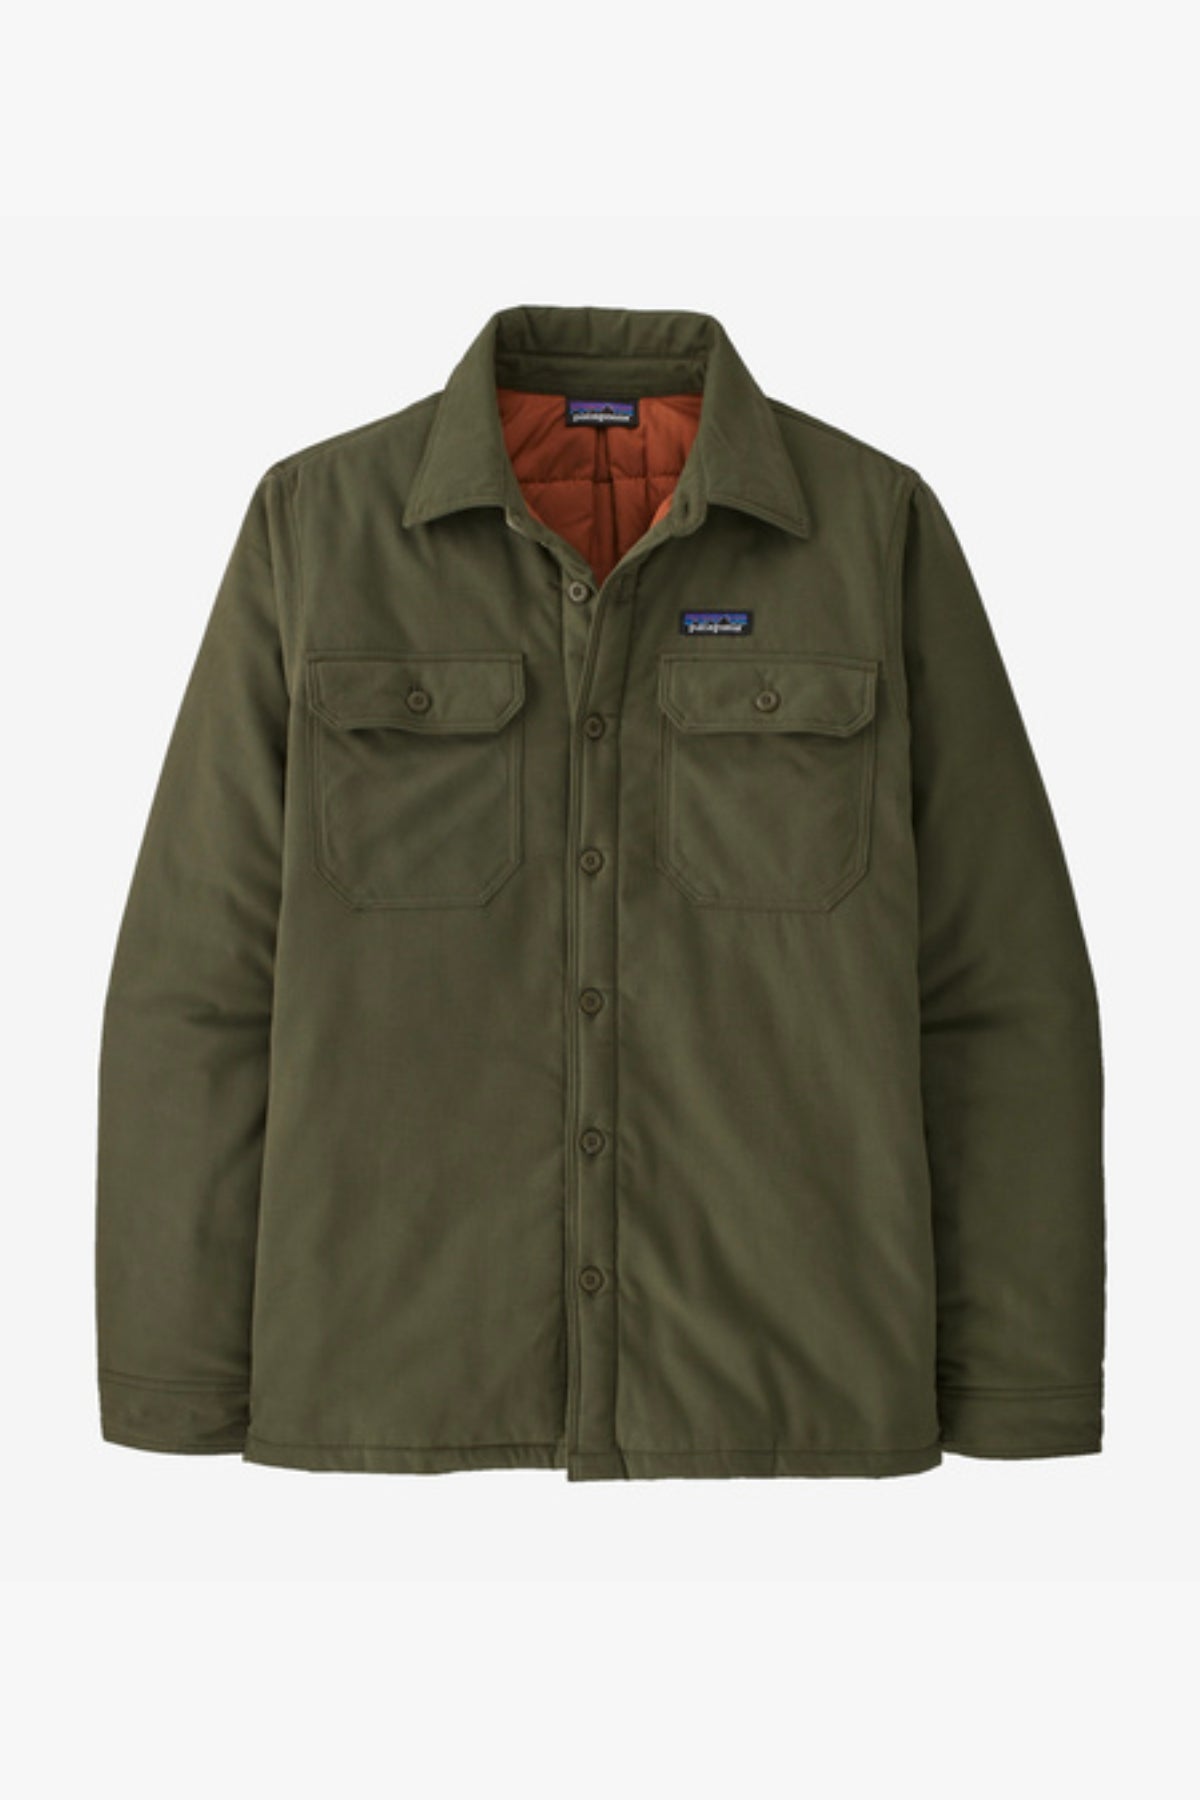 Veste M's Insulated Organic Cotton MW Fjord Flannel - Patagonia